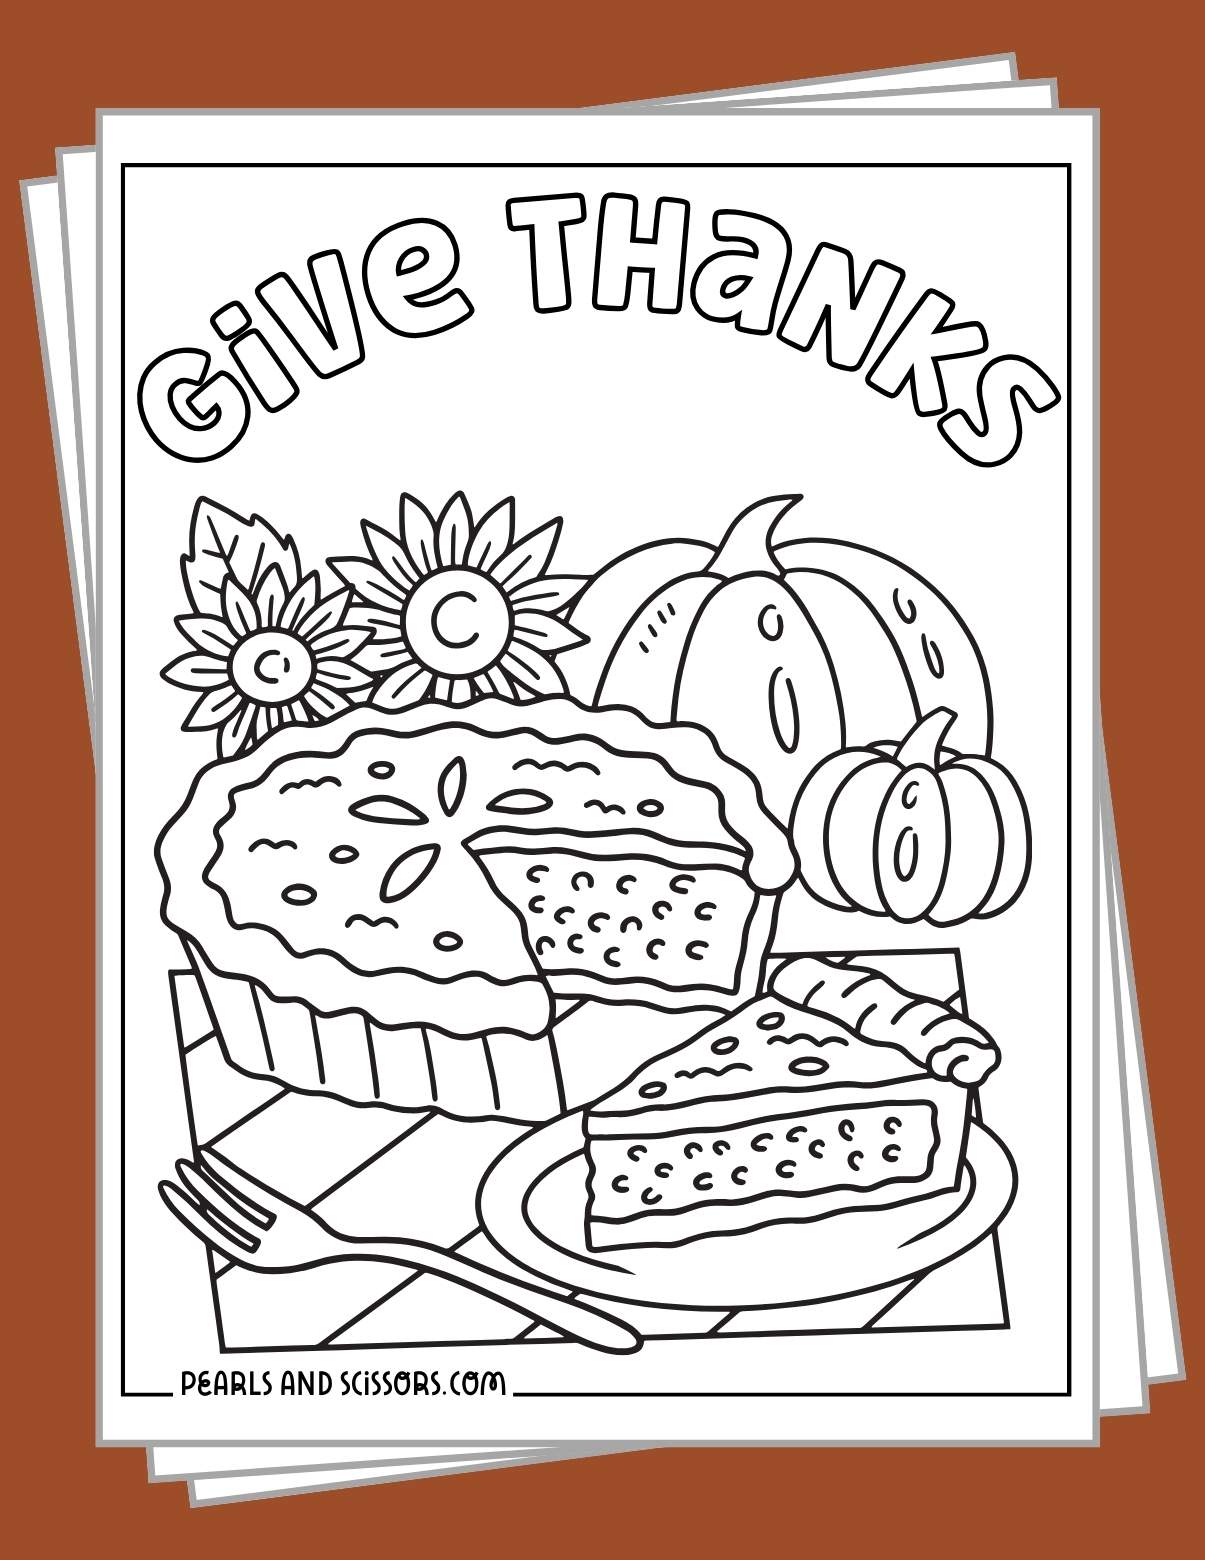 Free printable thanksgiving coloring pages to download.